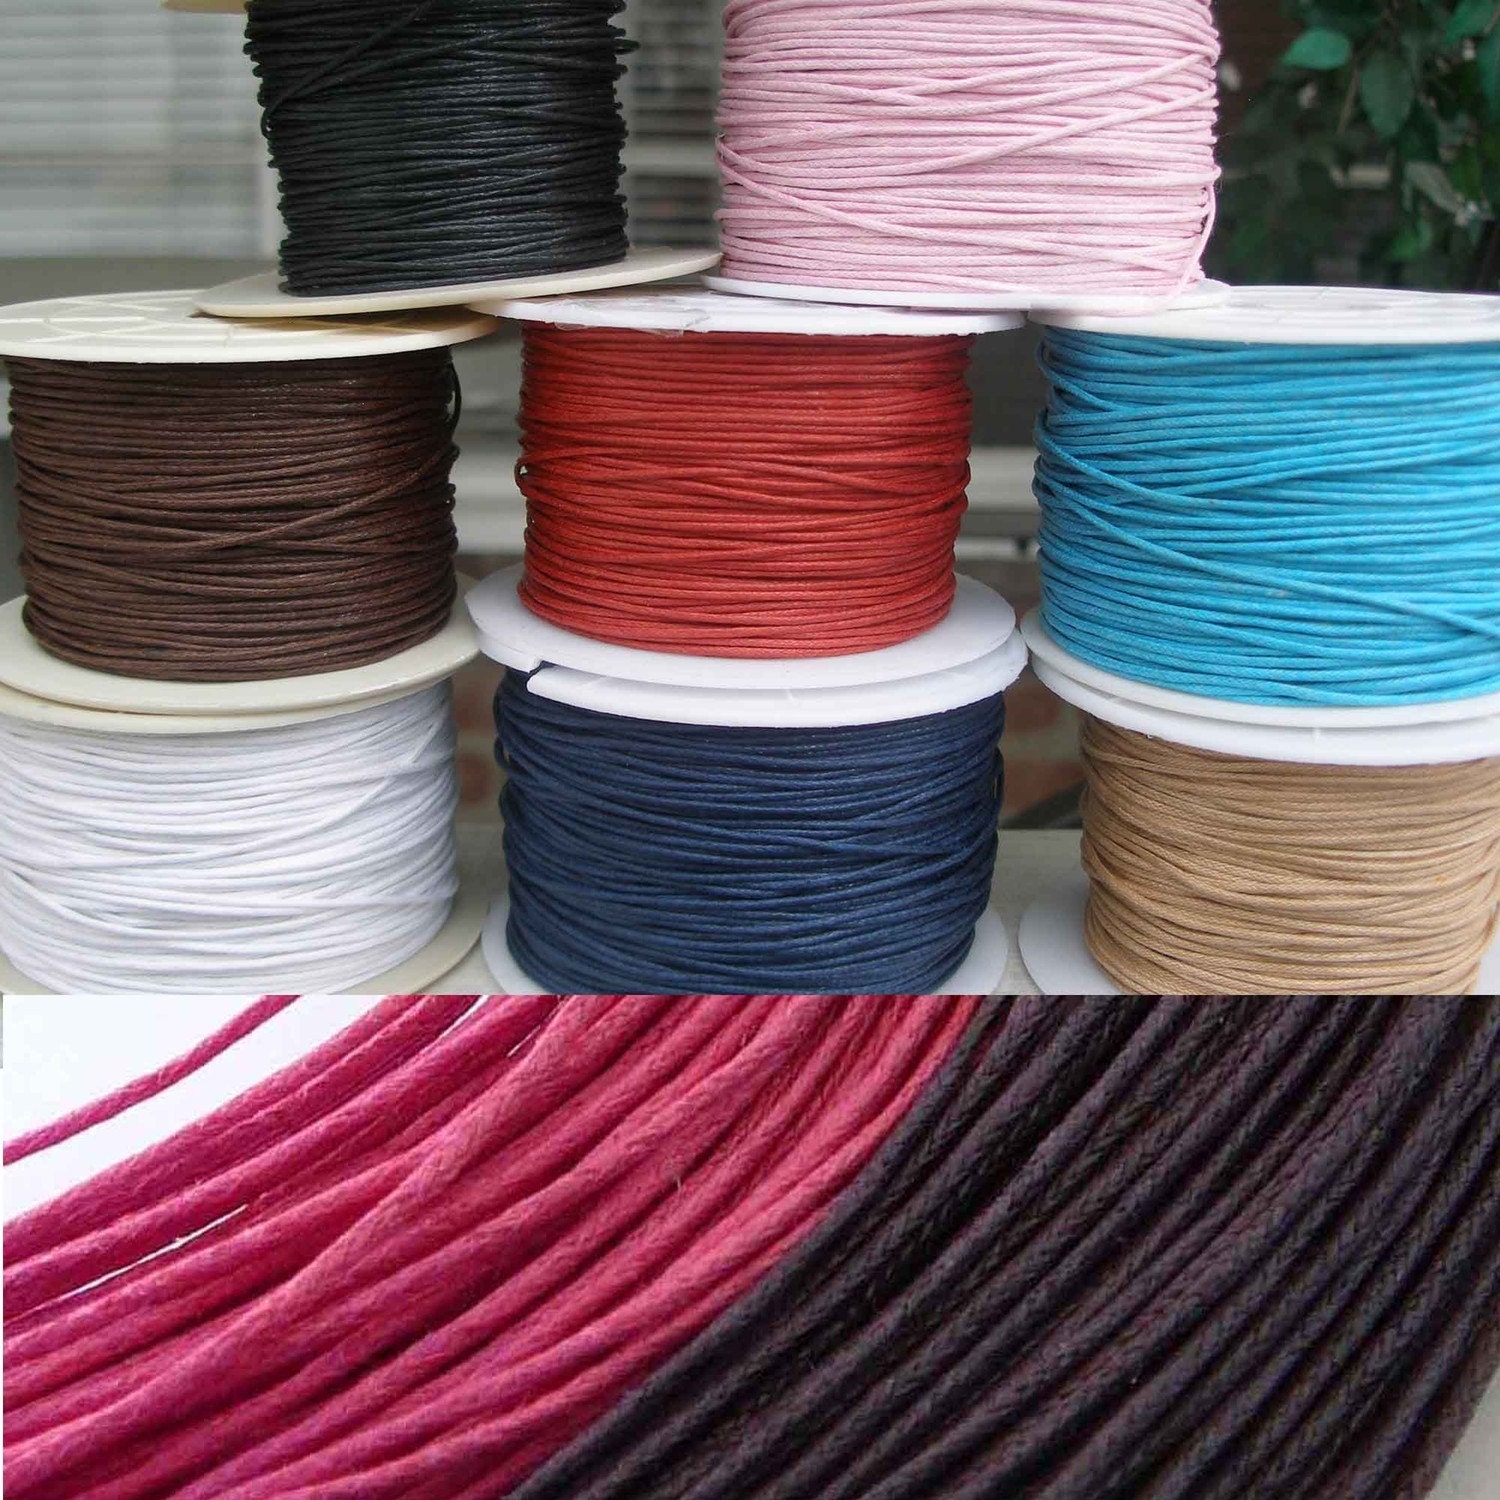 Necklace Cords Multi-Strand Waxed Cotton 20pc - Any length - 6 colors for Tile Pendants/Aanraku Bails